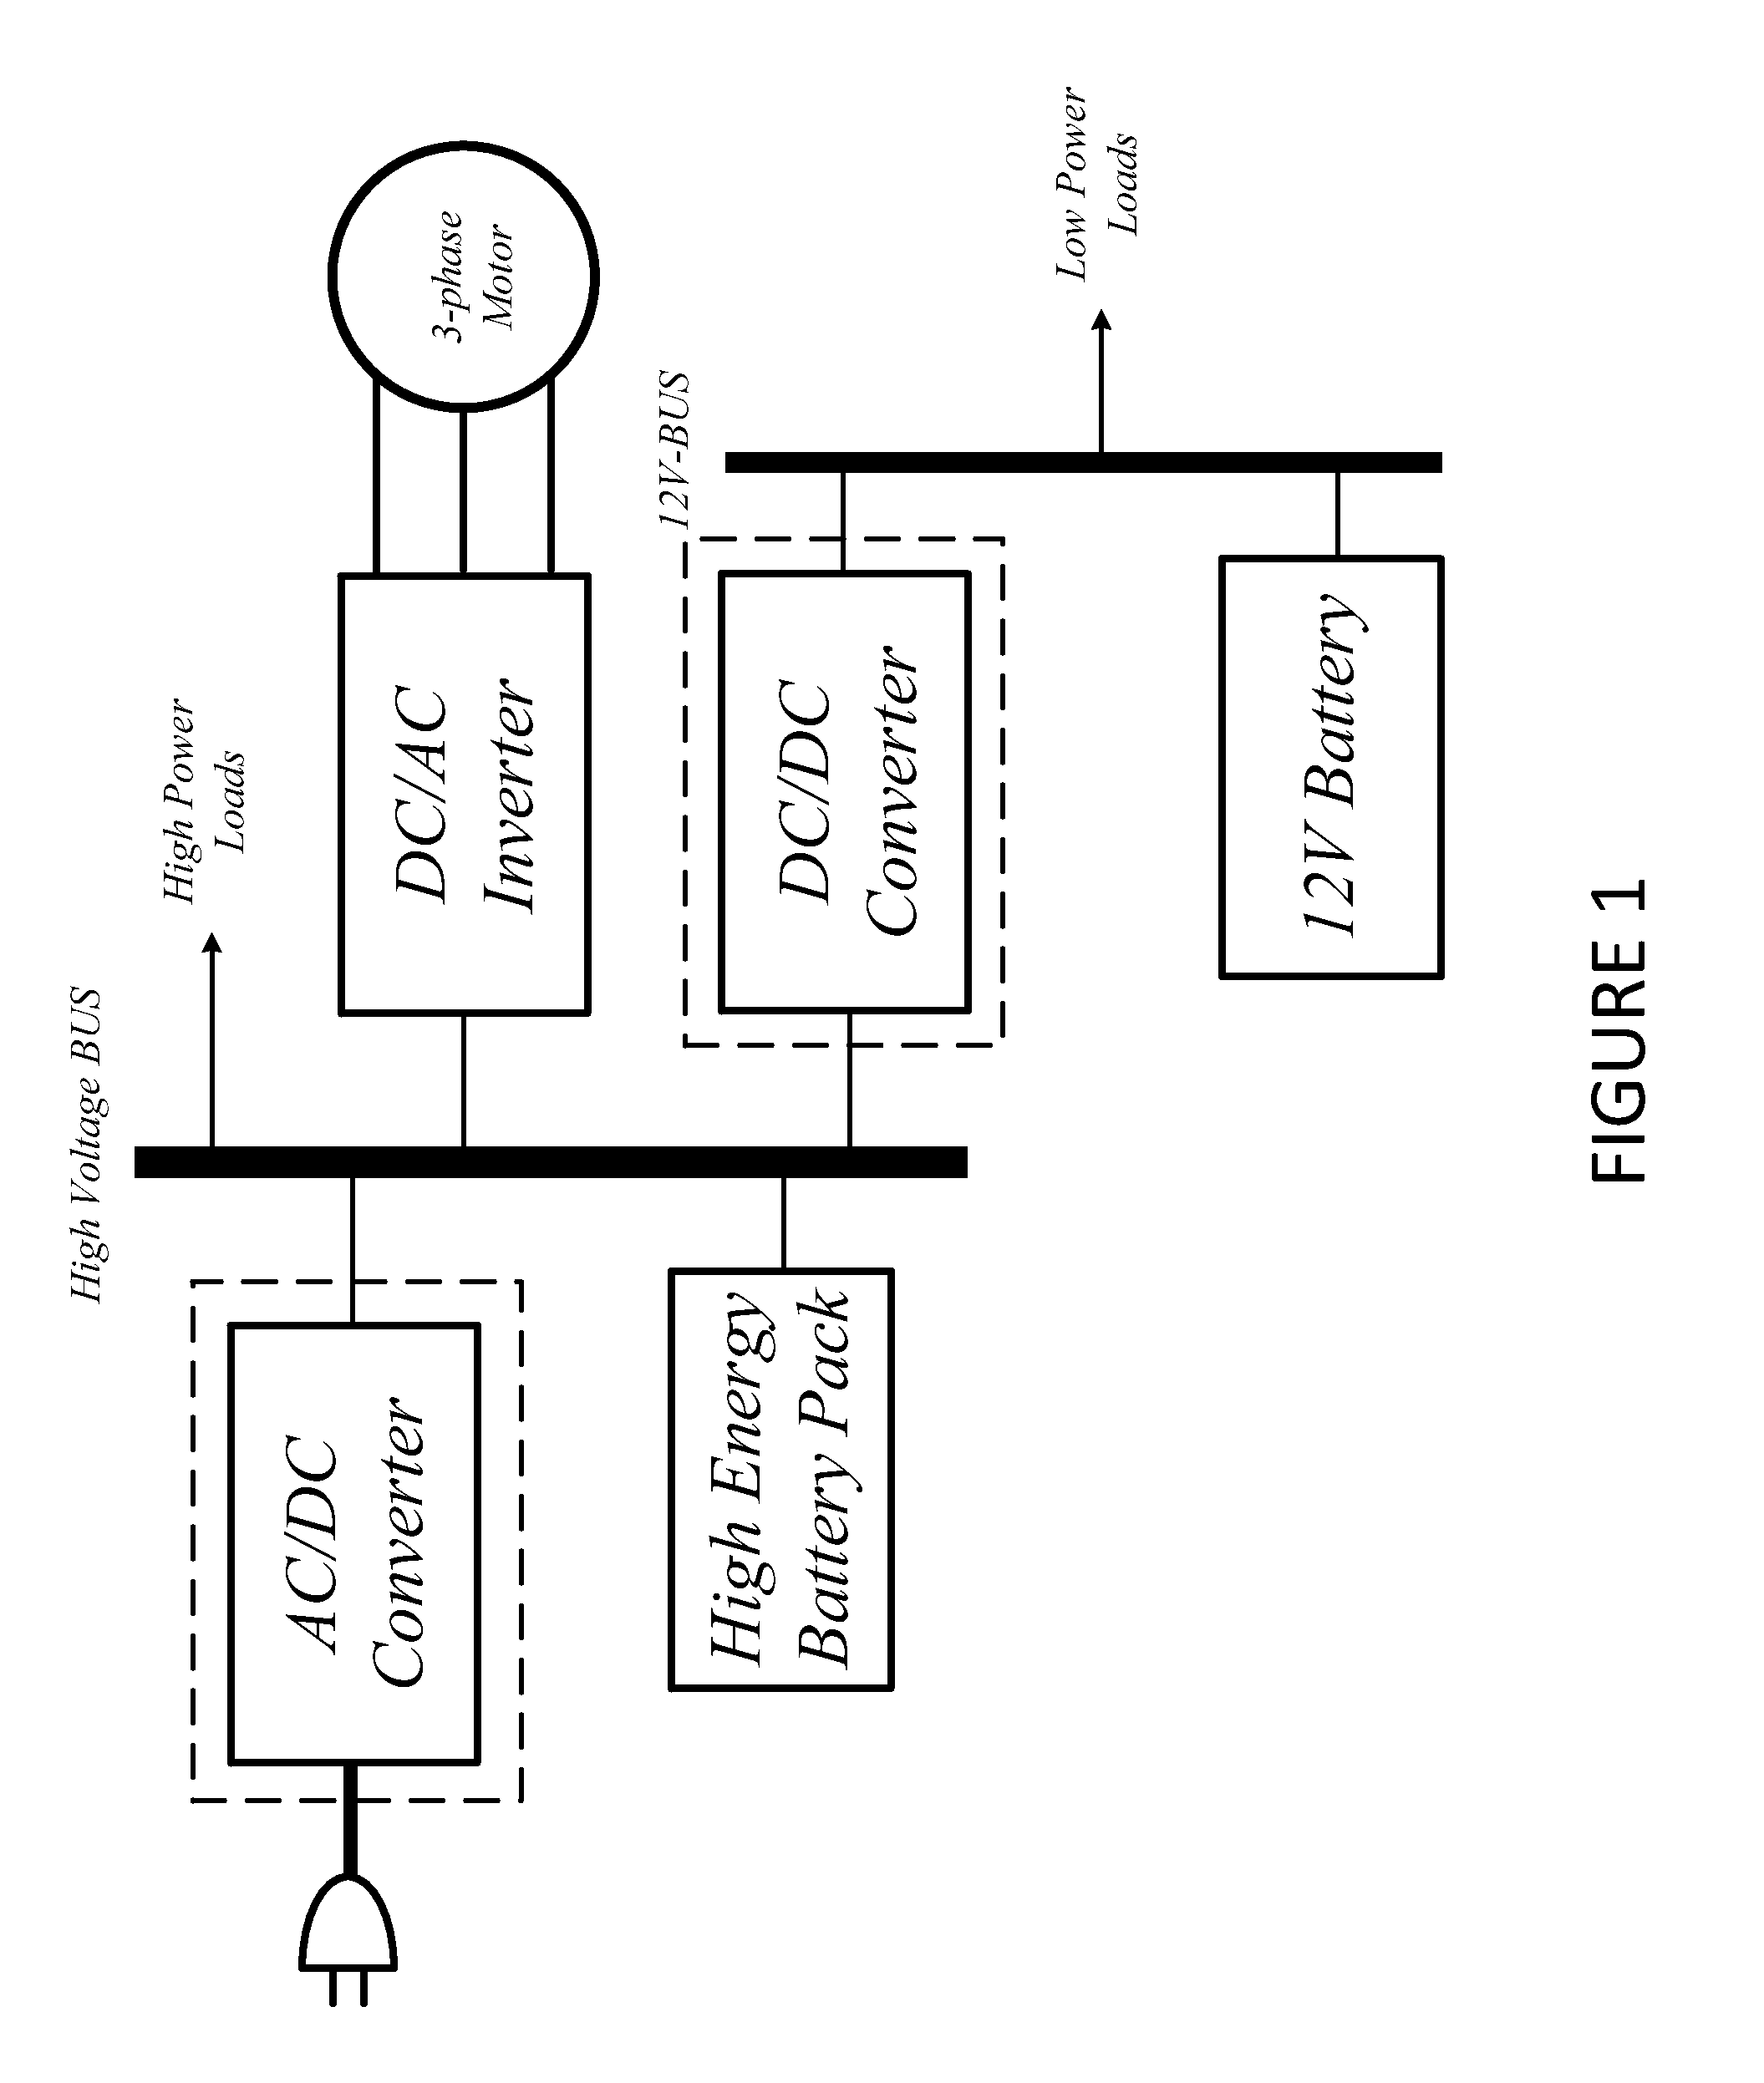 Load adaptive variable frequency phase-shift full-bridge dc/dc converter